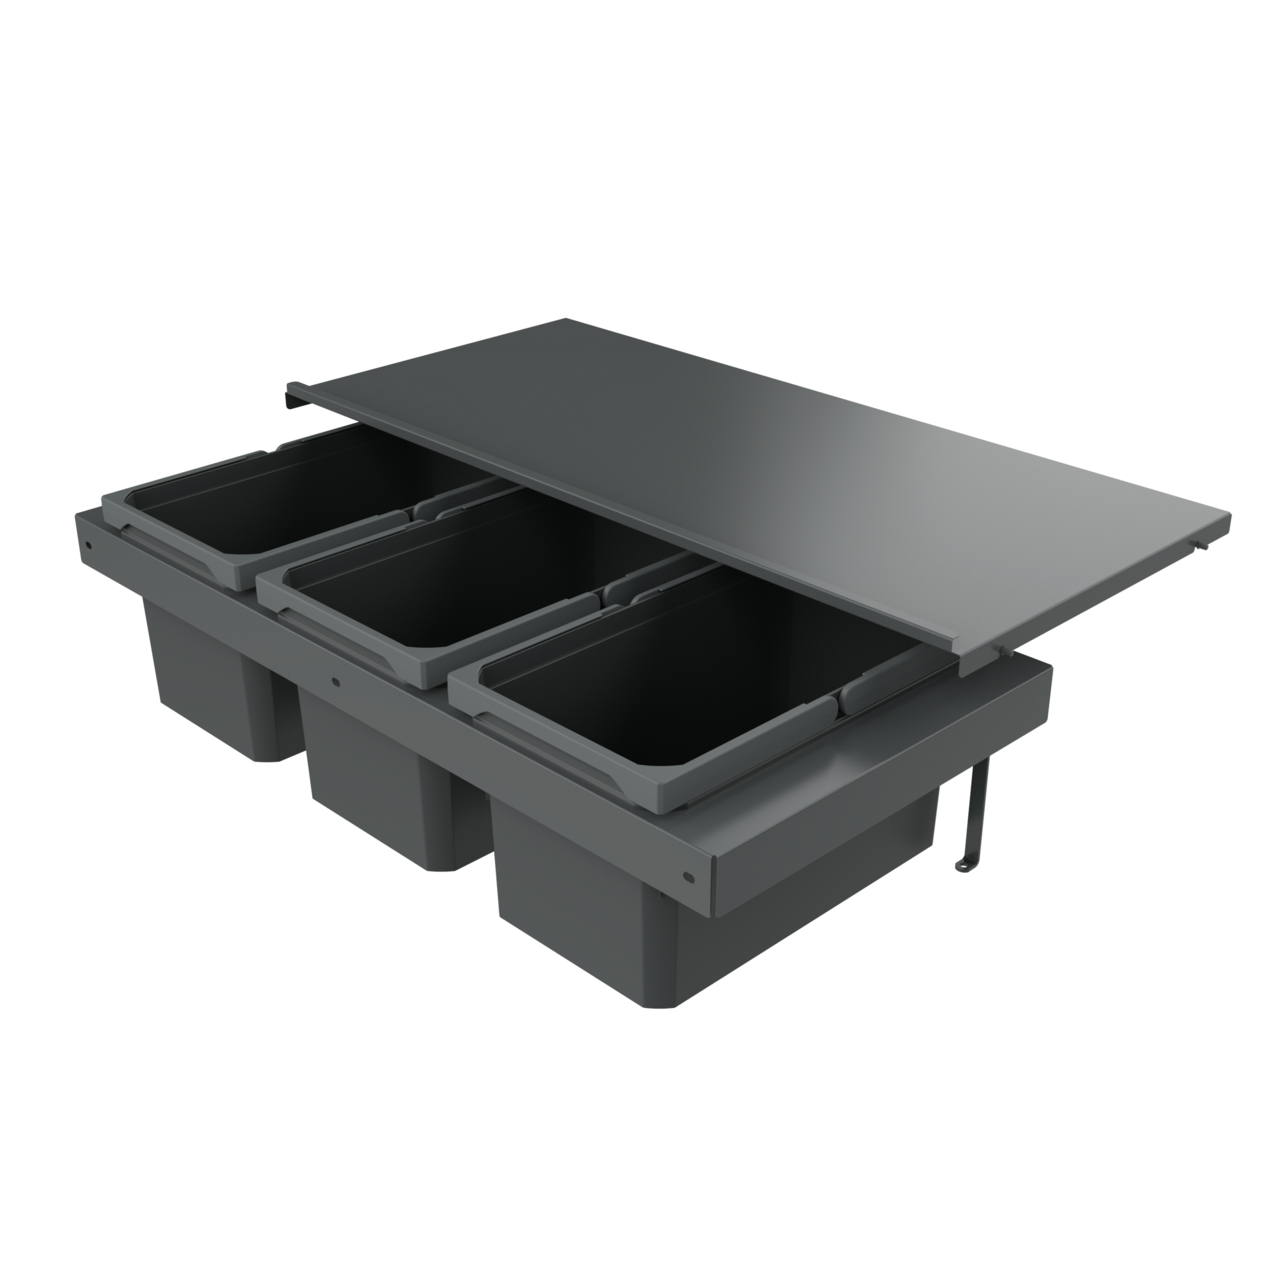  Cox Stand-UP® 250 S/900-3, anthracite, H 235 mm